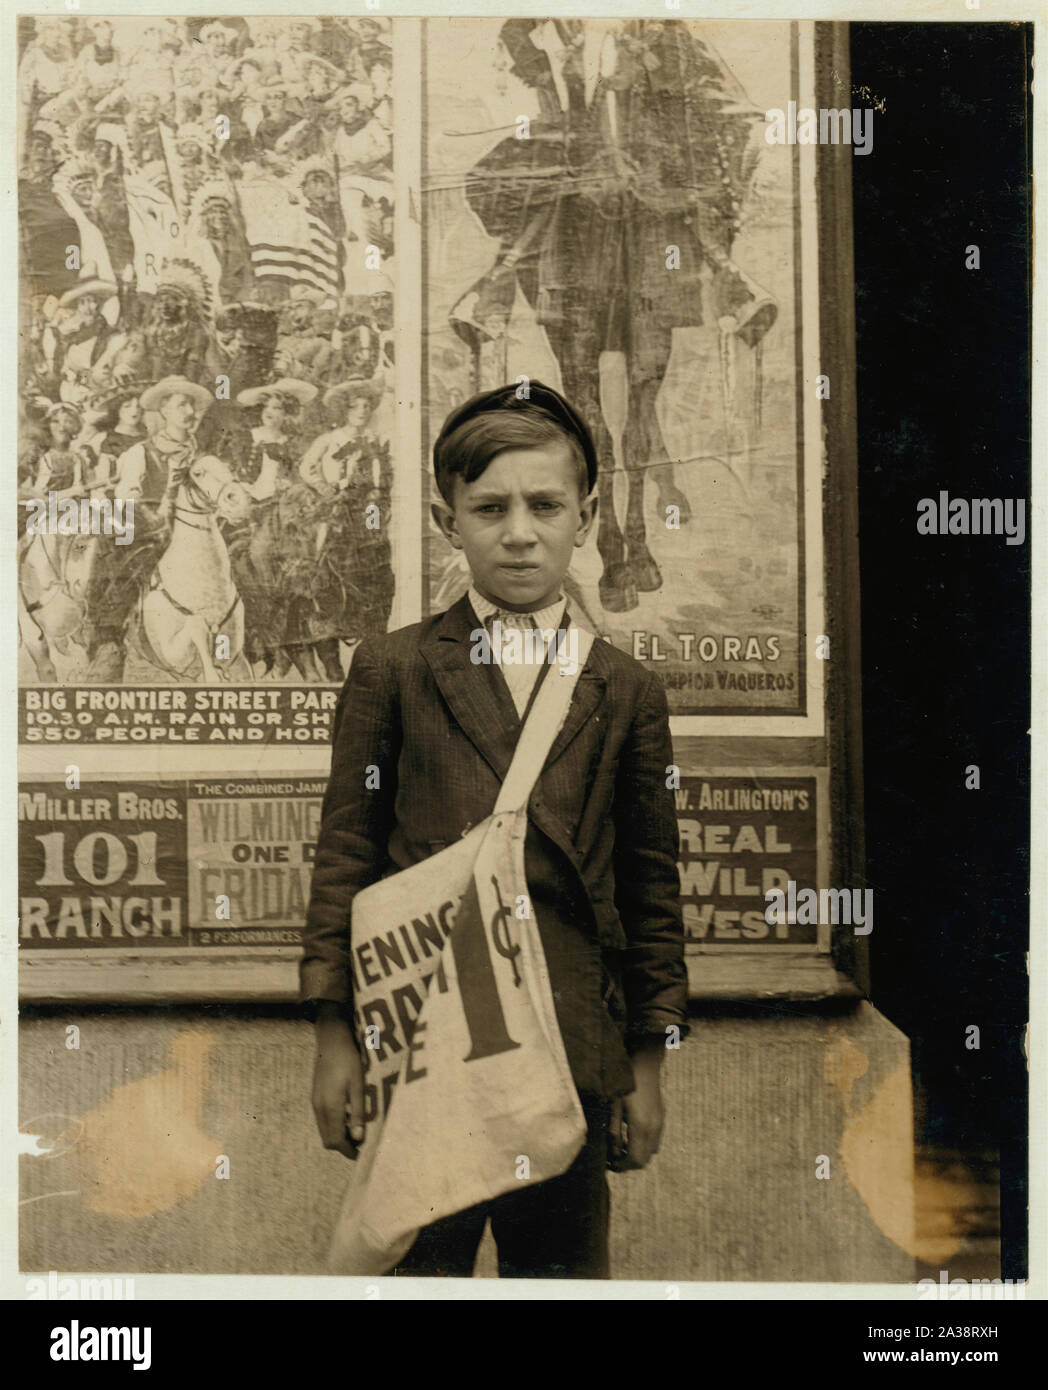 S. Russell, 33 E. 22nd St. Newsboy, 12 years of age. Selling newspapers 2 years. Average earnings 20 cents daily. Selling newspapers own choice. Father earns $18 weekly. Boy deposits earnings in du Pont Savings Bank, and on Saturday night works for Reynold's candy shop, delivering packages. Don't smoke. Visits saloons. Works 5 hours daily, except Saturday, when he works 11. Stock Photo